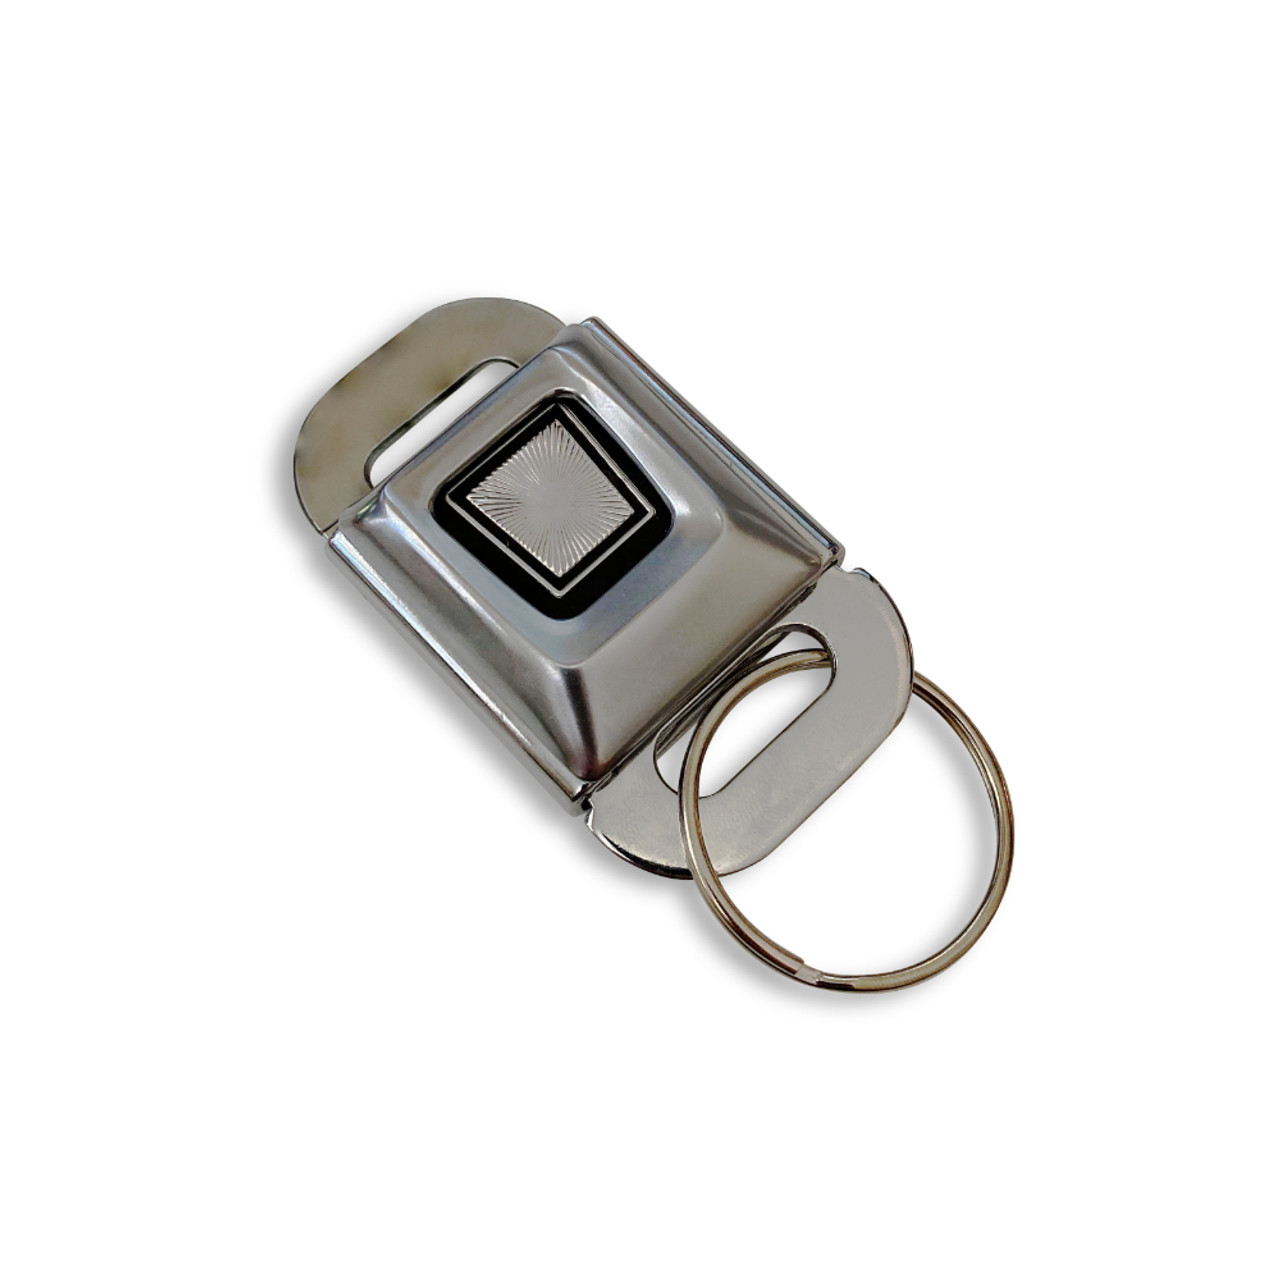 Shop for and Buy Seat Belt Buckle Key Holder with Keychain at .  Large selection and bulk discounts available.